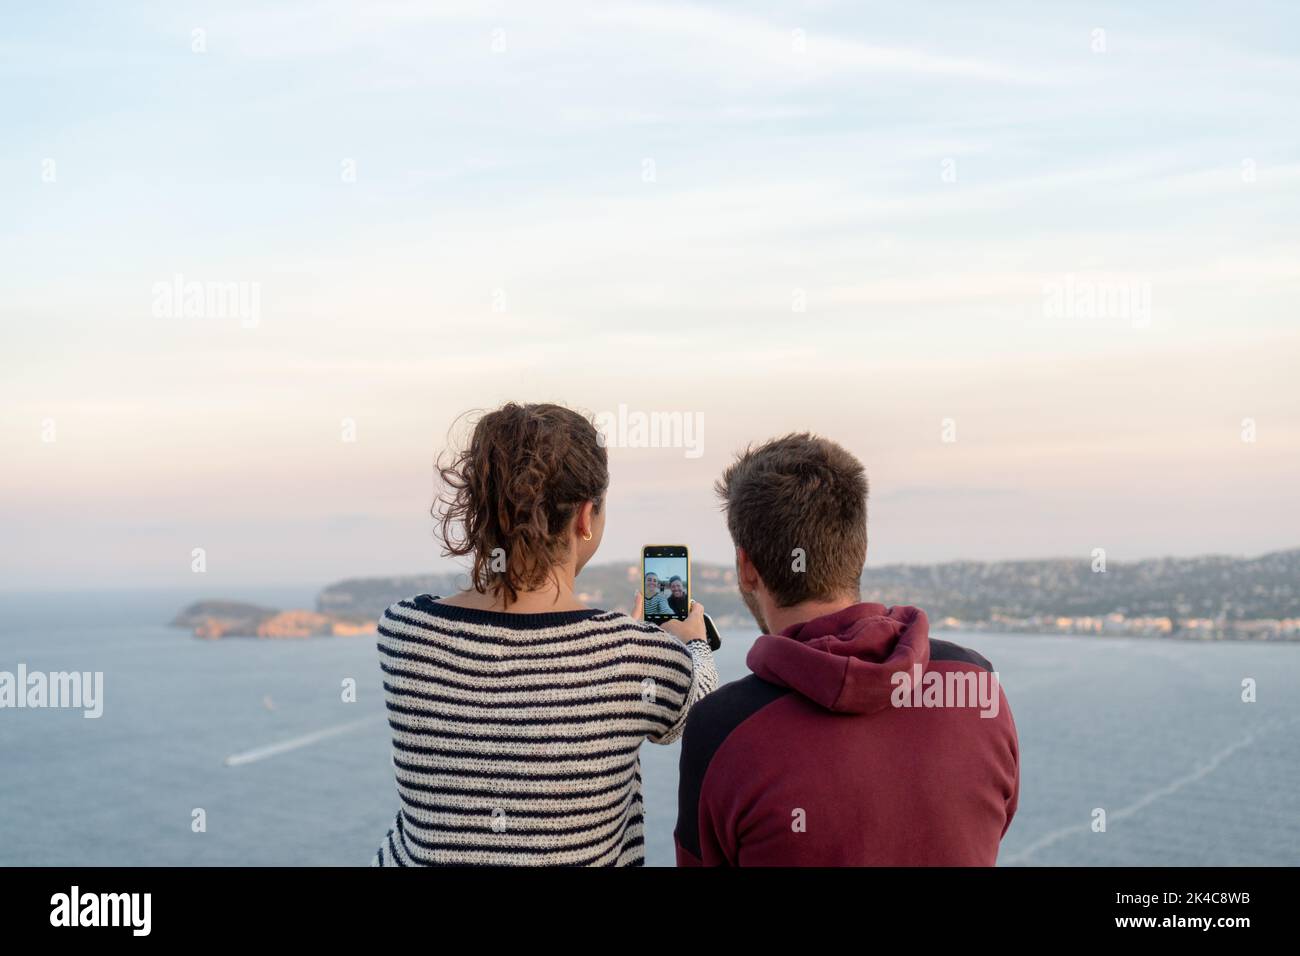 A couple sitting and taking selfies with the beautiful seascape at sunset Stock Photo